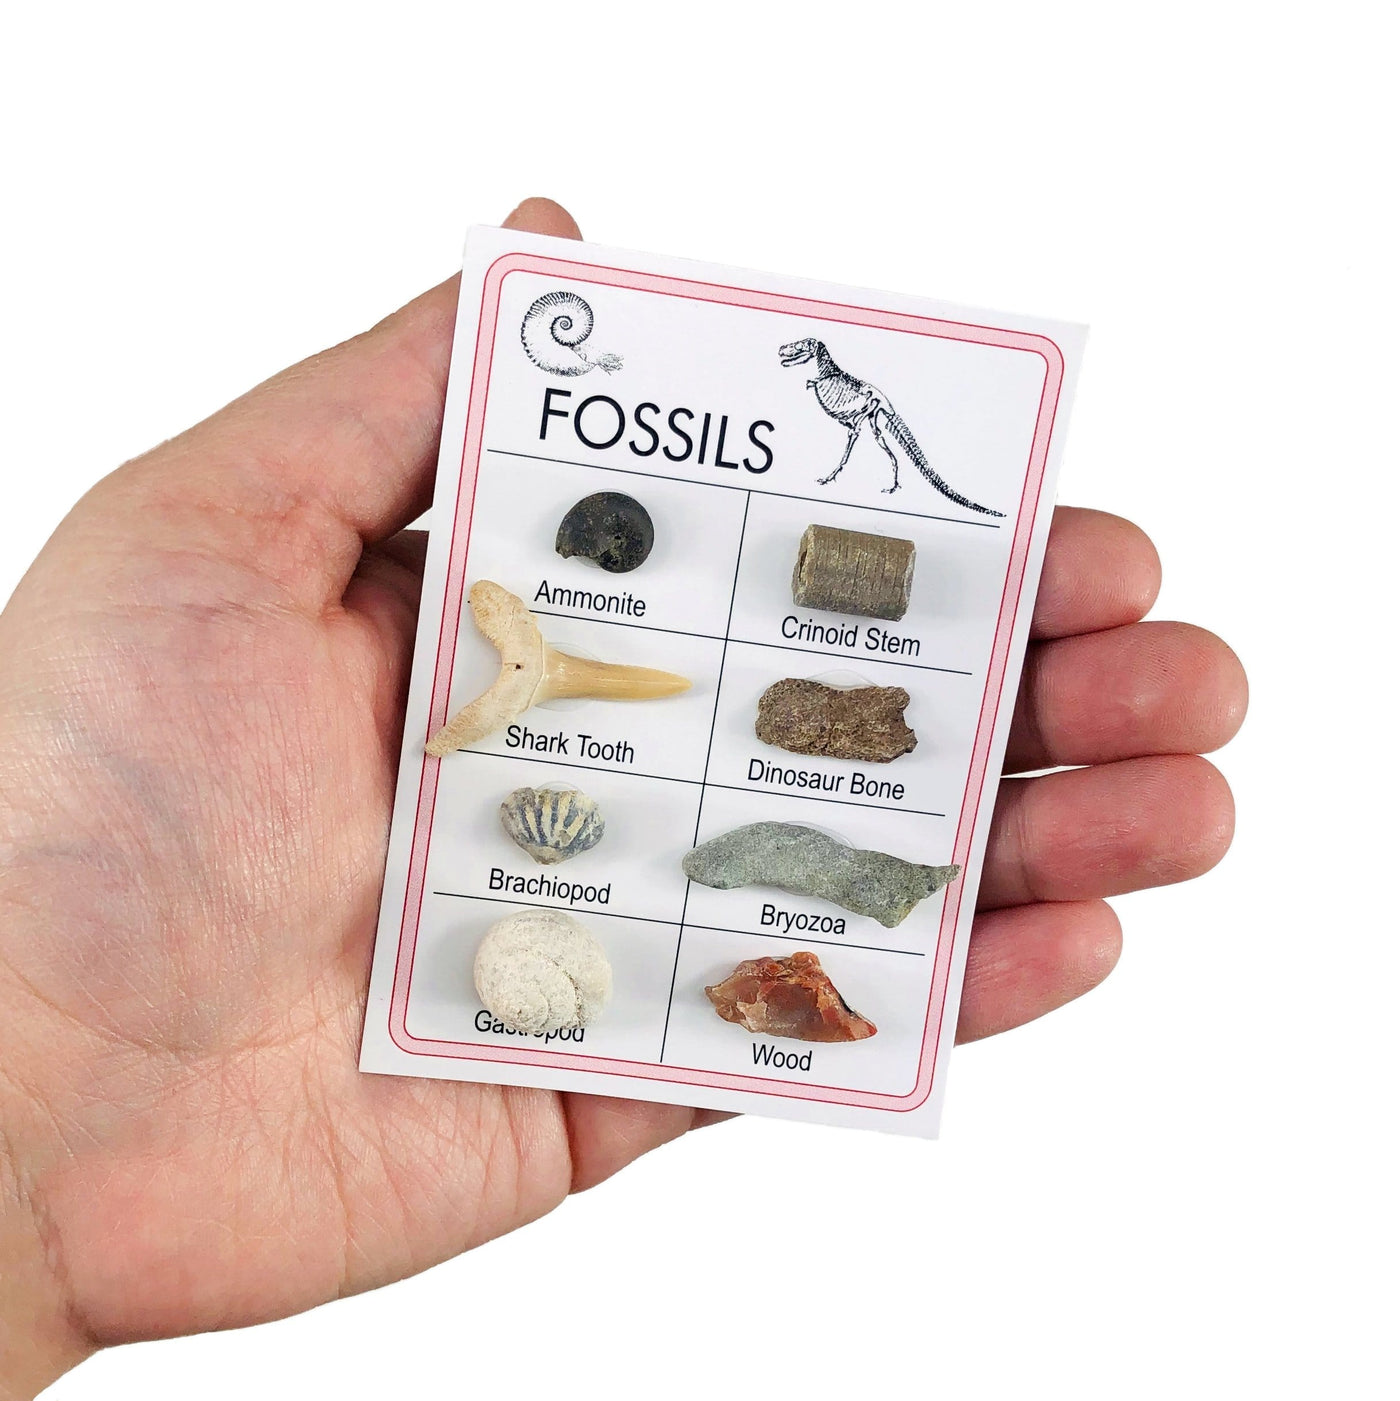 Fossil Specimen Cards - Variety of Fossils in a hand for size reference